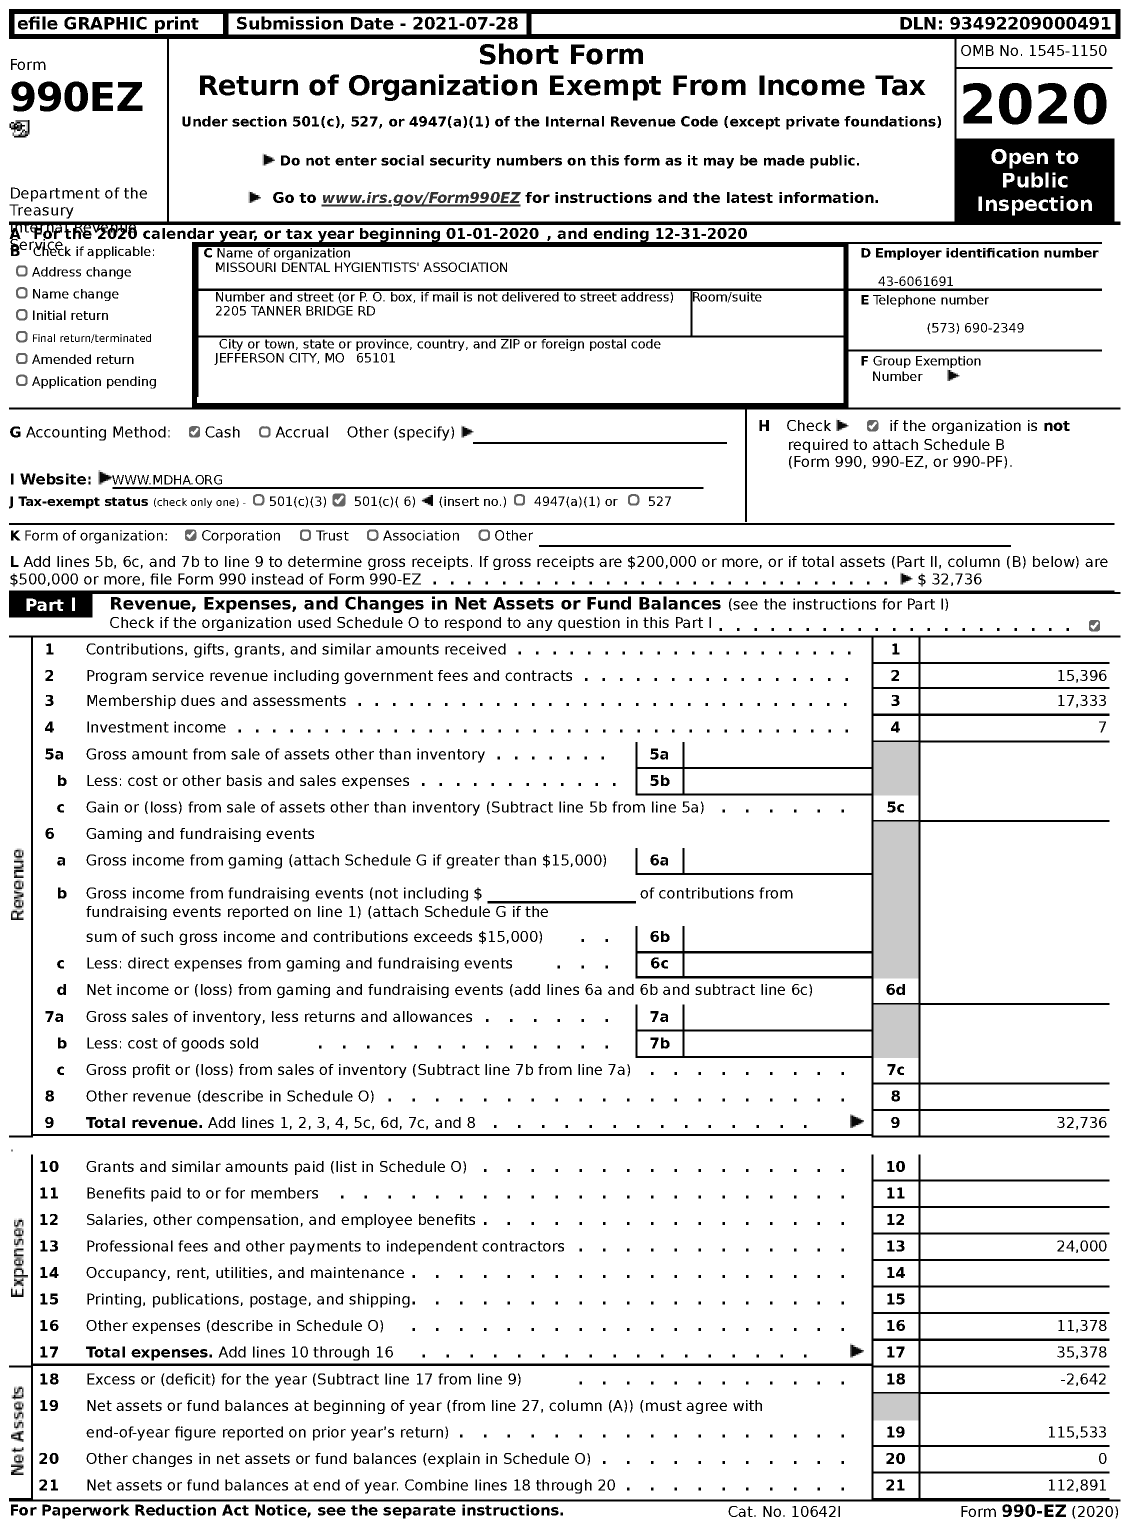 Image of first page of 2020 Form 990EZ for Missouri Dental Hygientists' Association